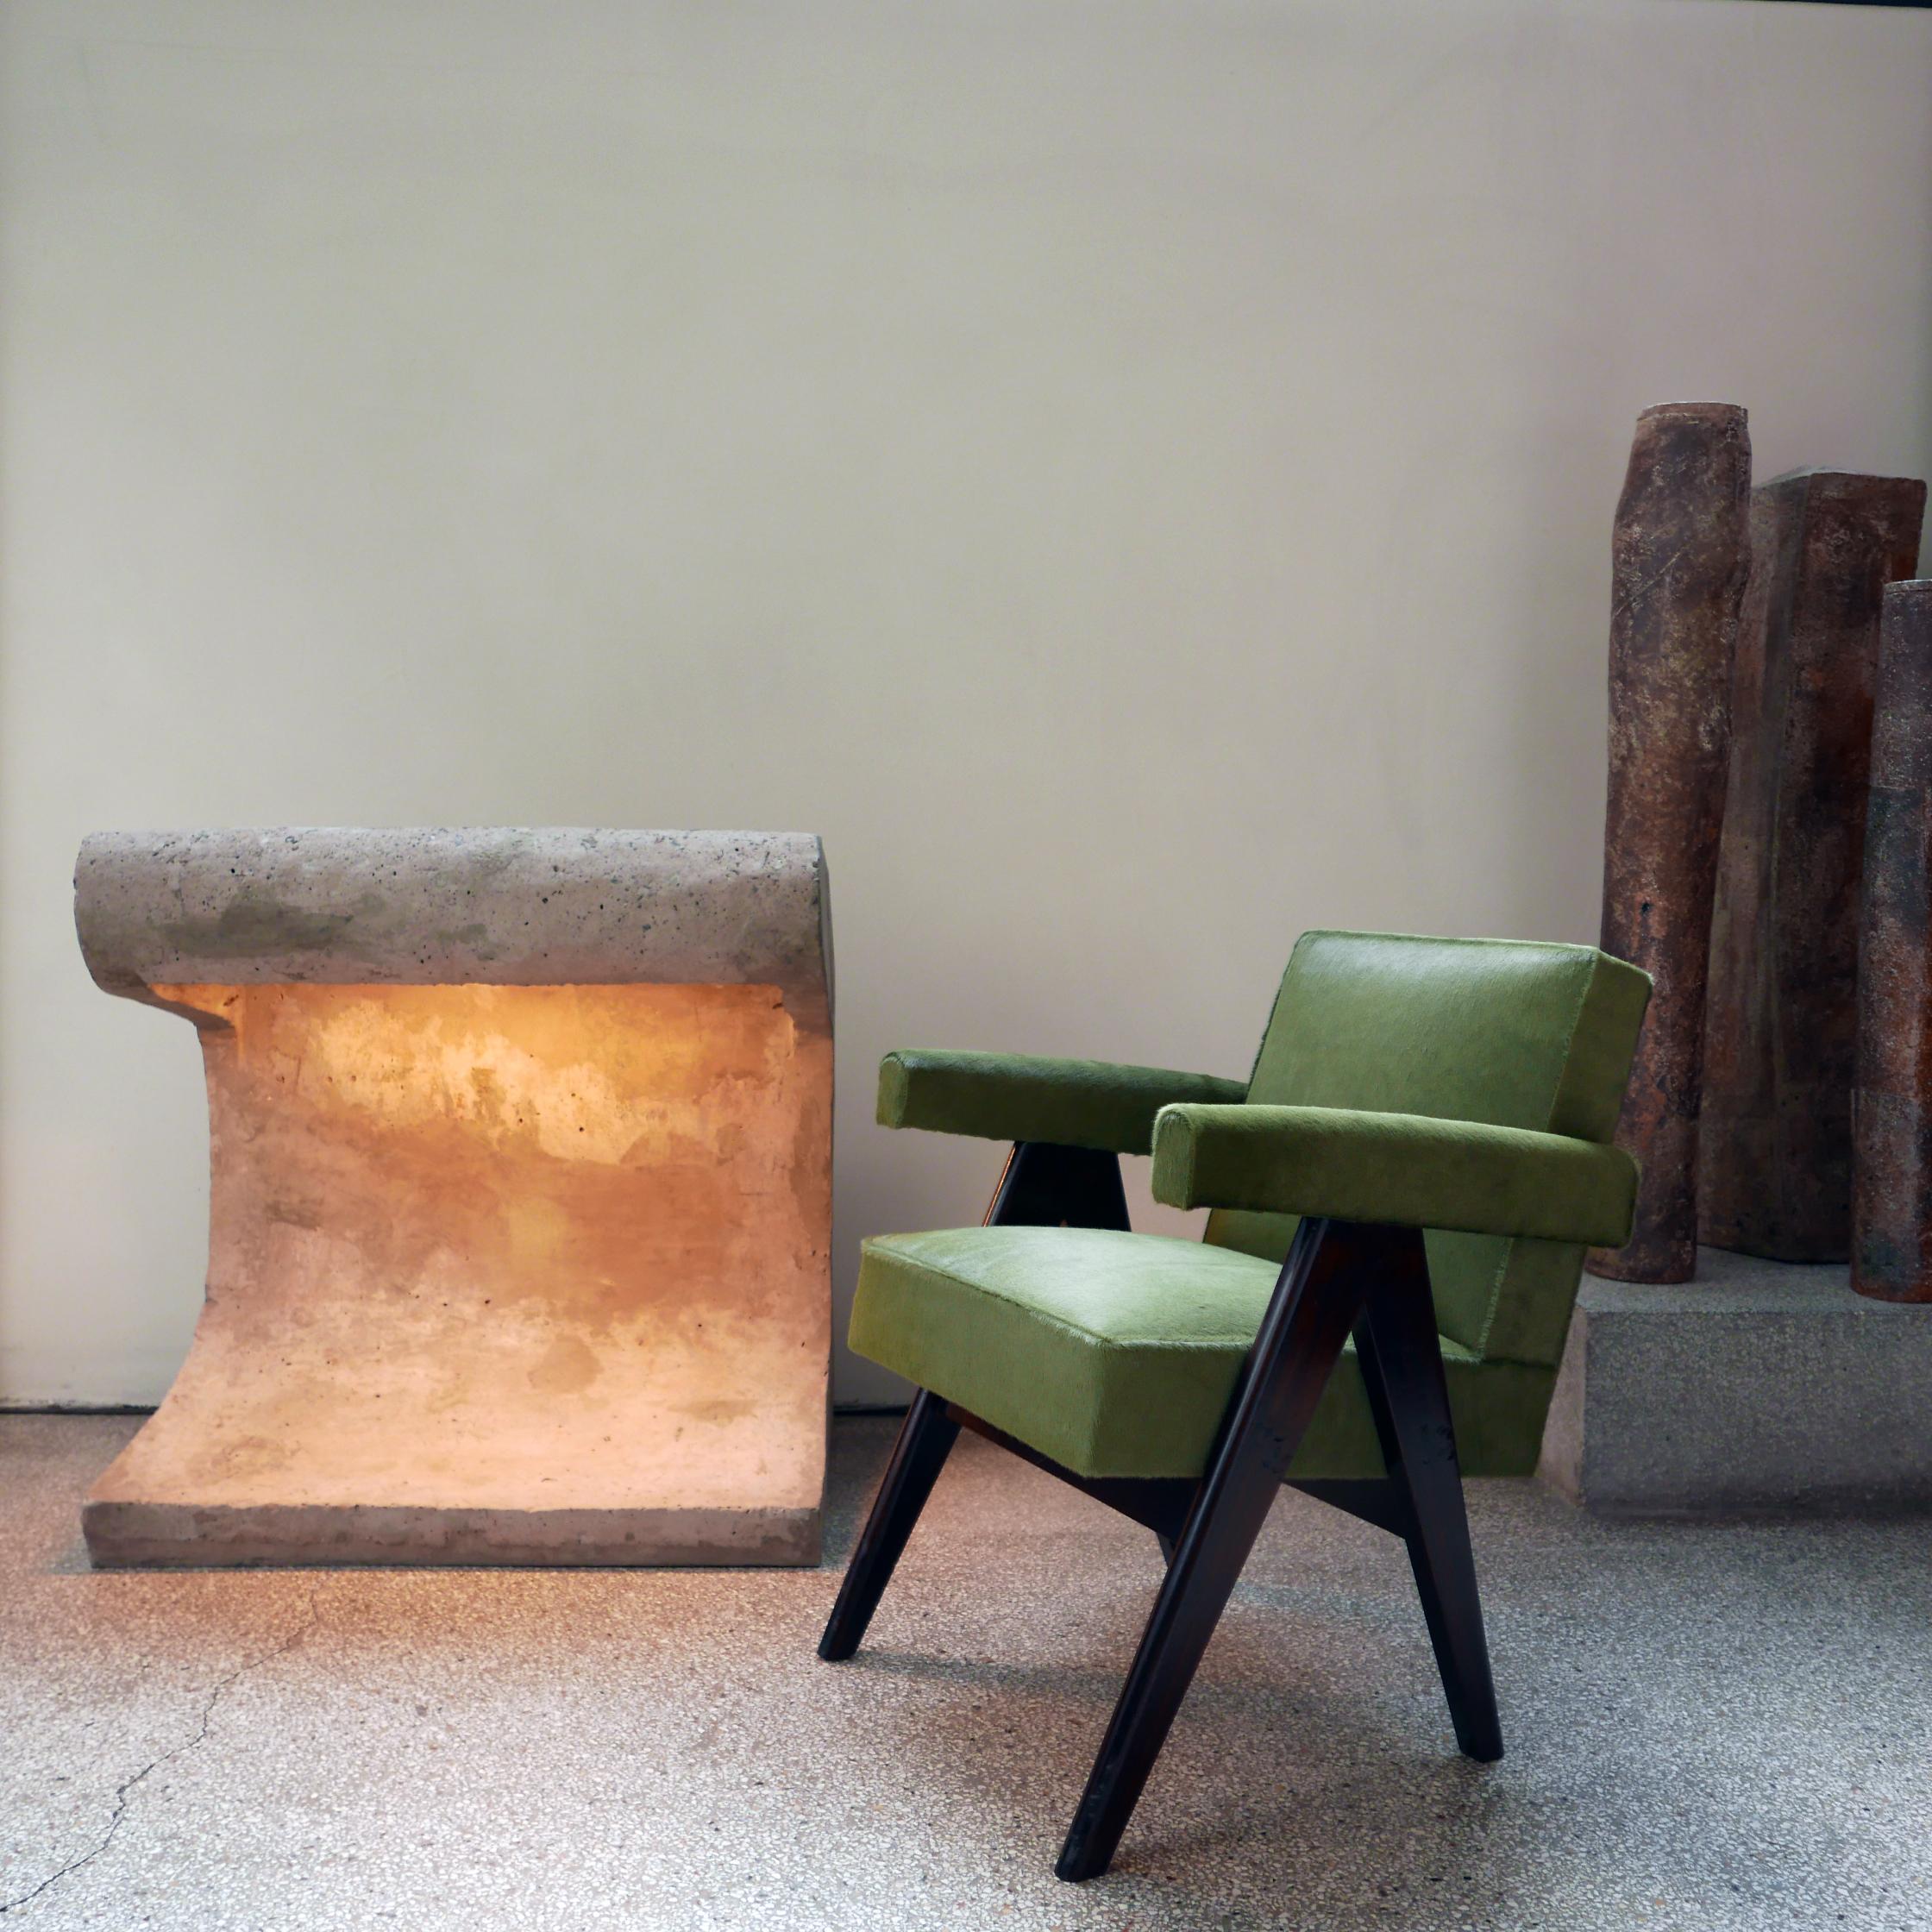 Indian Pierre Jeanneret, PJ-SI-30-D, Committee Armchair, Chandigarh, circa 1955